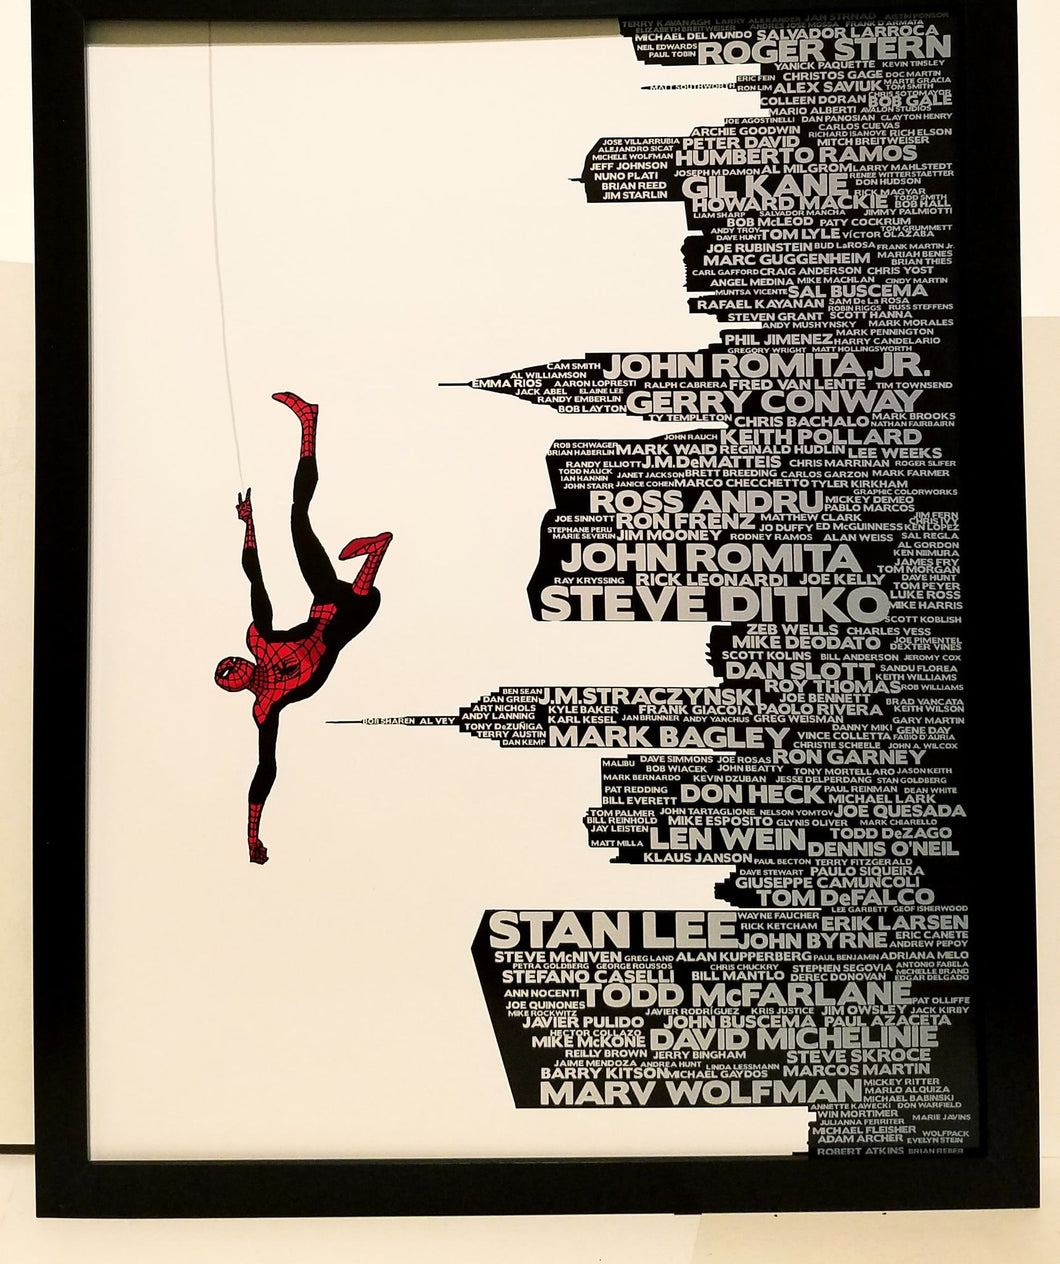 Amazing Spider-Man #700 by Marcos Martin 11x14 FRAMED Marvel Comics Art Print Poster